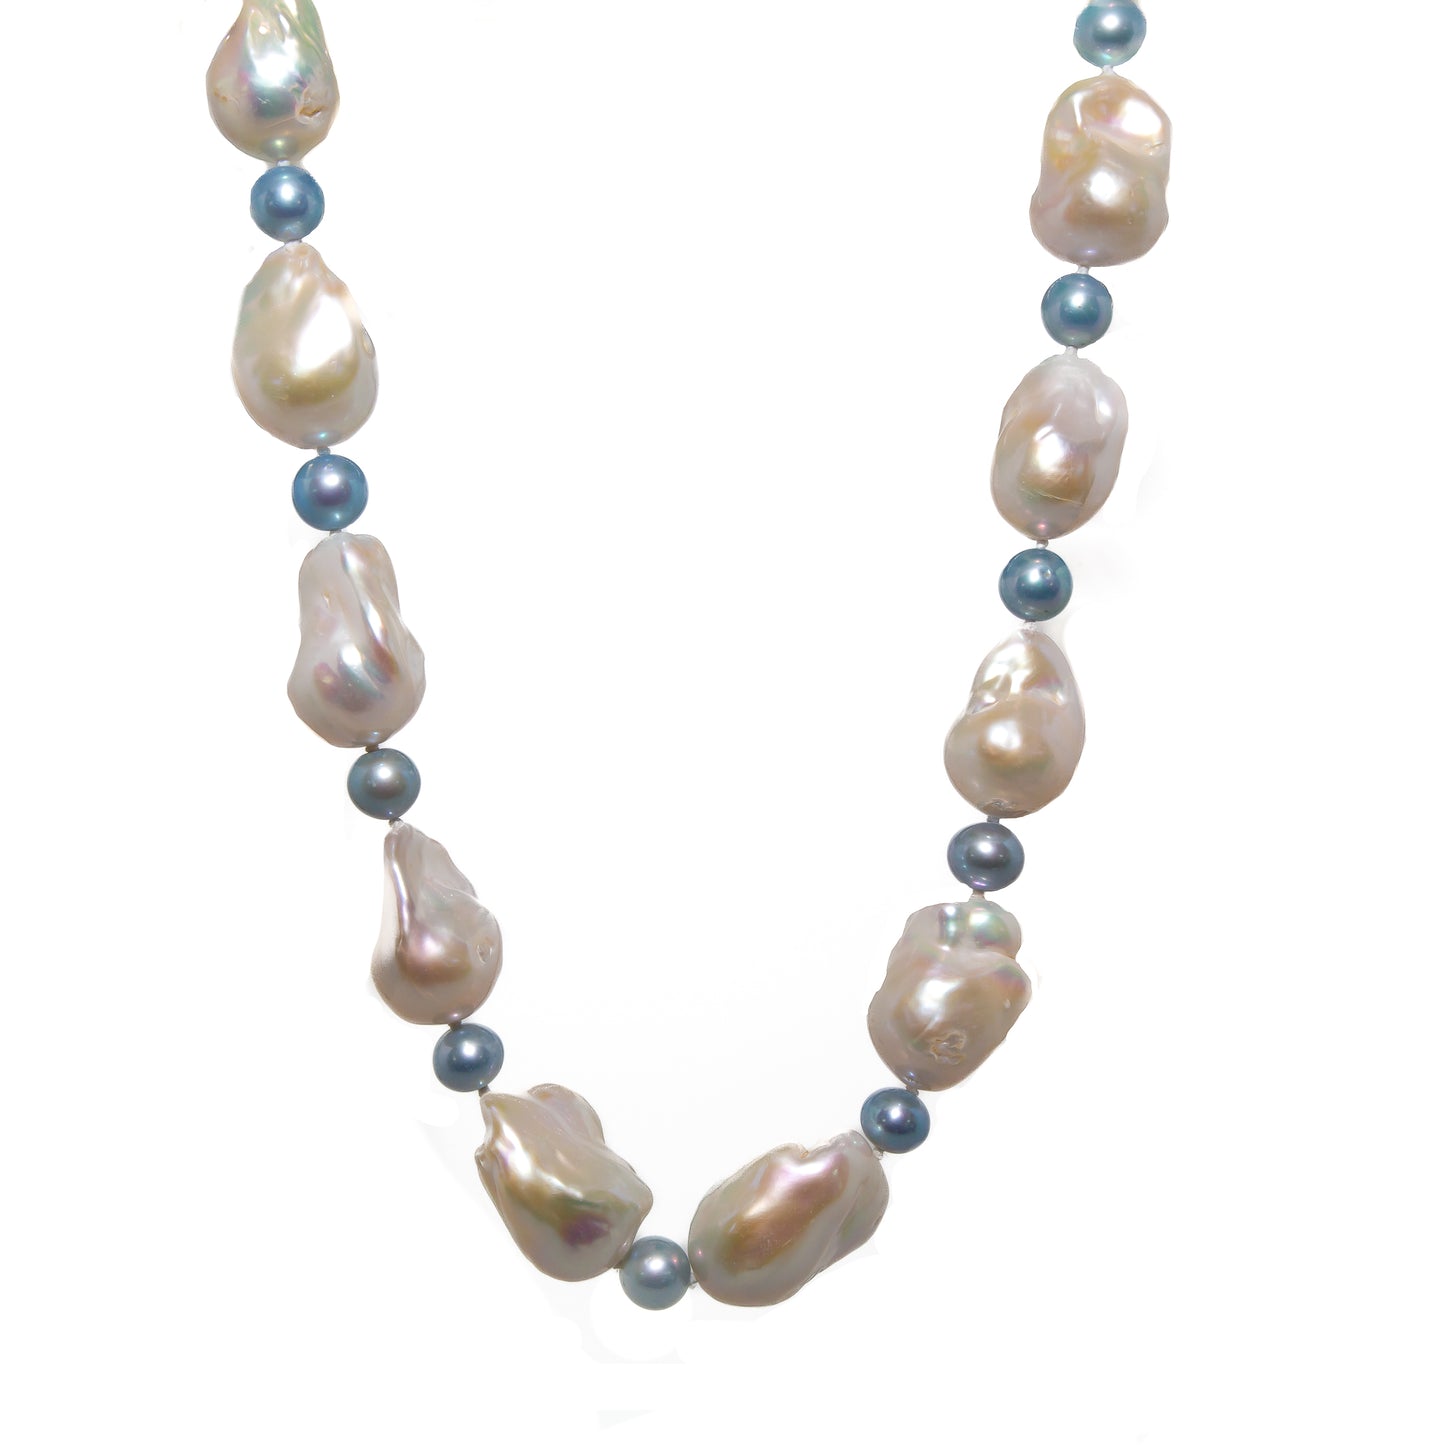 Botero Baroque Blue and White Pearls Necklace